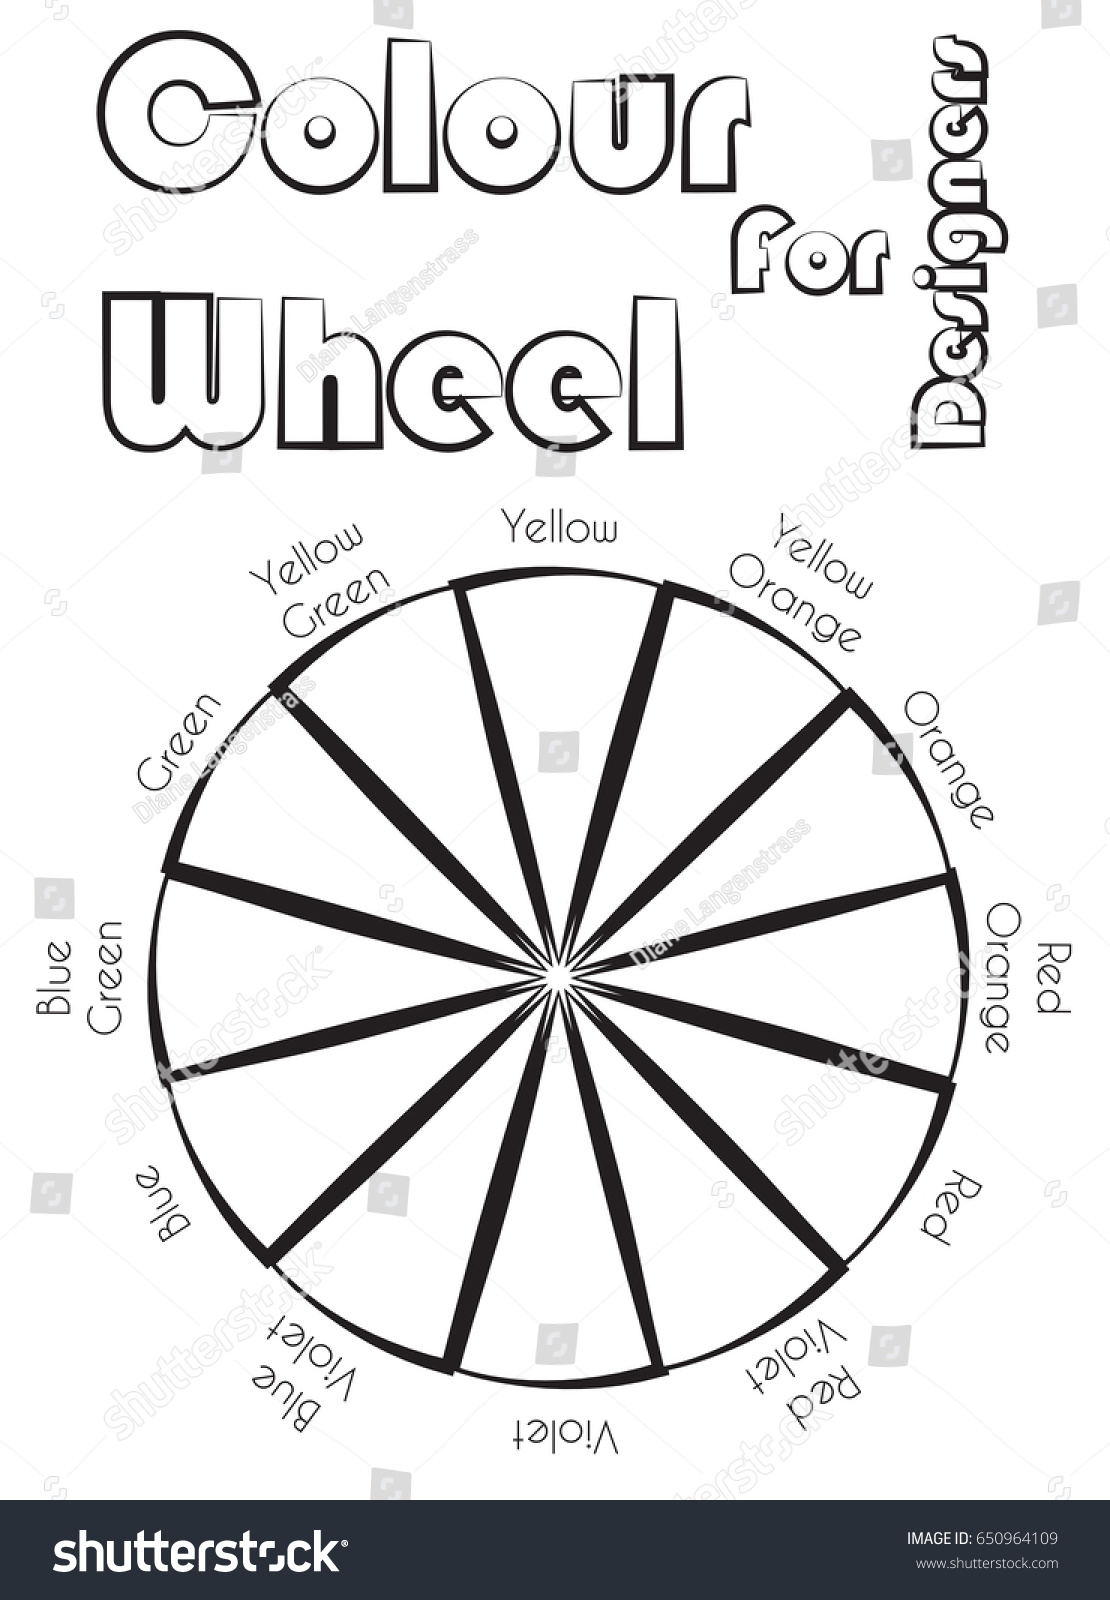 Color wheel use coloring page stock illustration